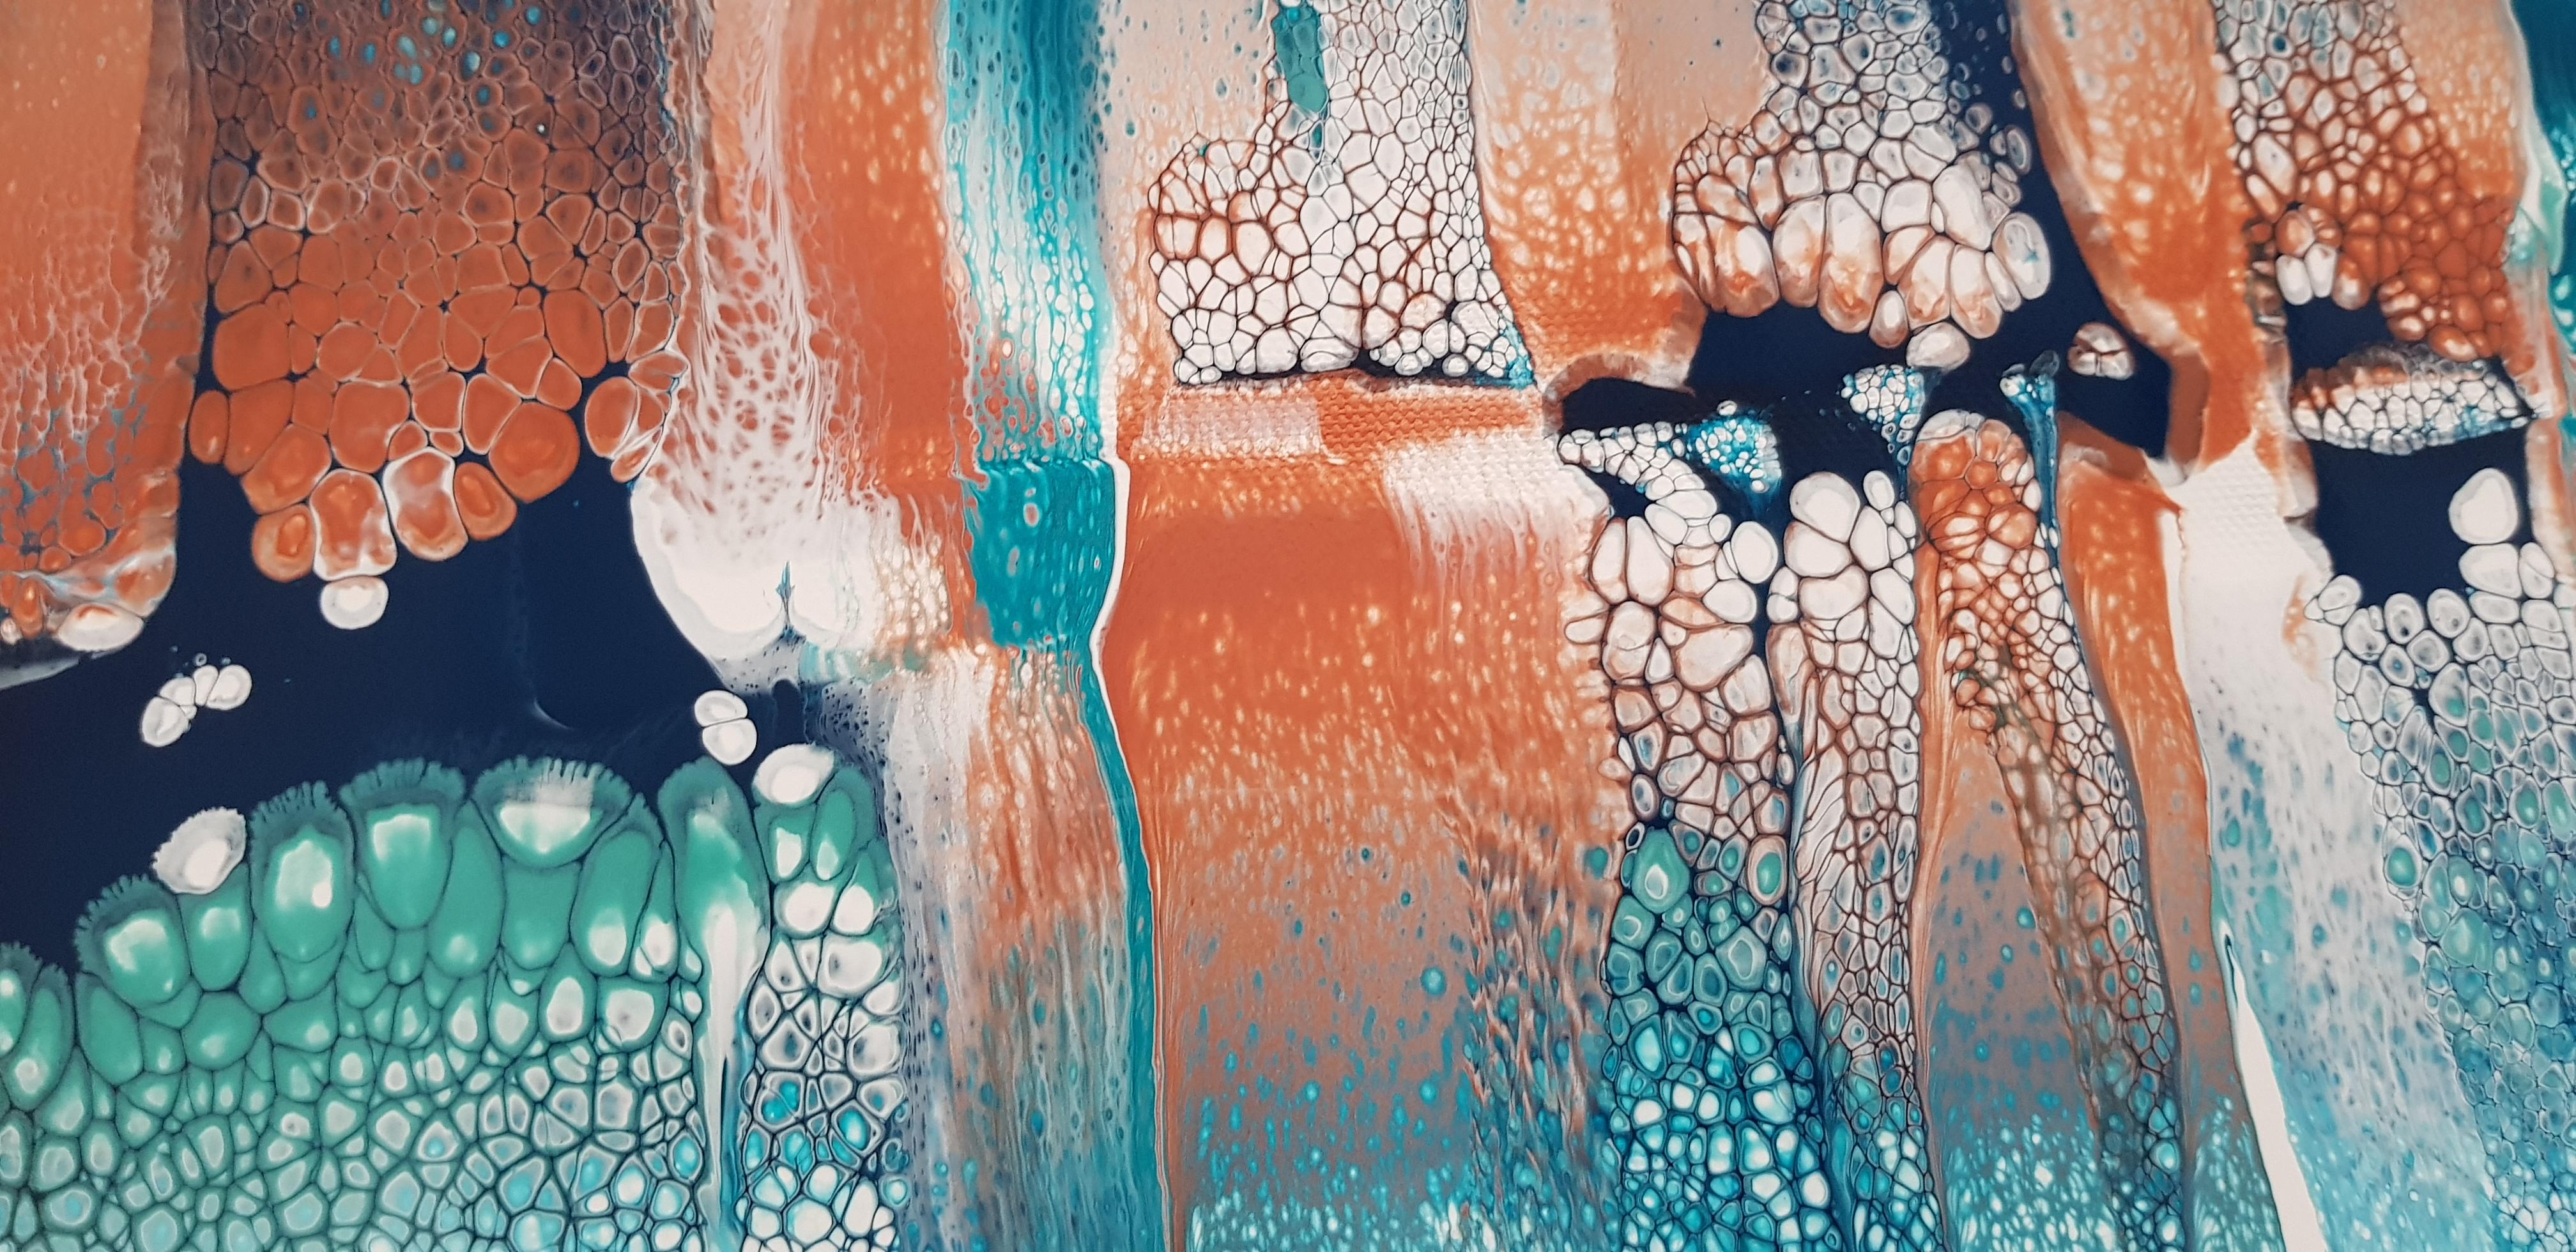 Introduction to Fluid Art with Live For Art